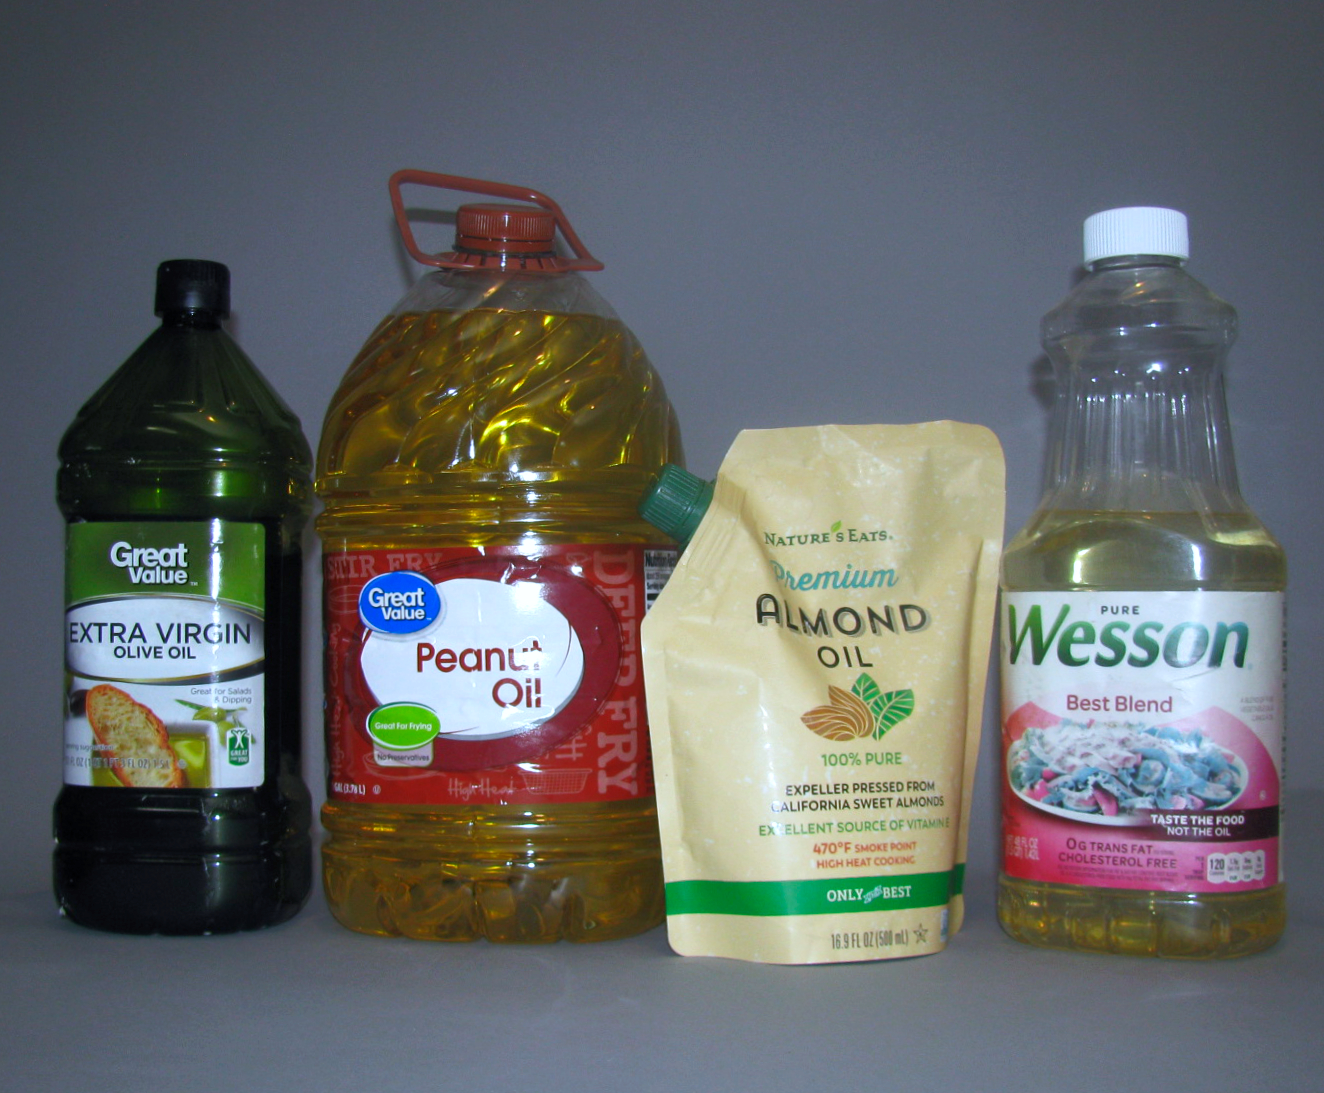 Cooking Oils - Extra Virgin Olive Oil, Peanut Oil, Almond Oil and Vegetable Blend Oil